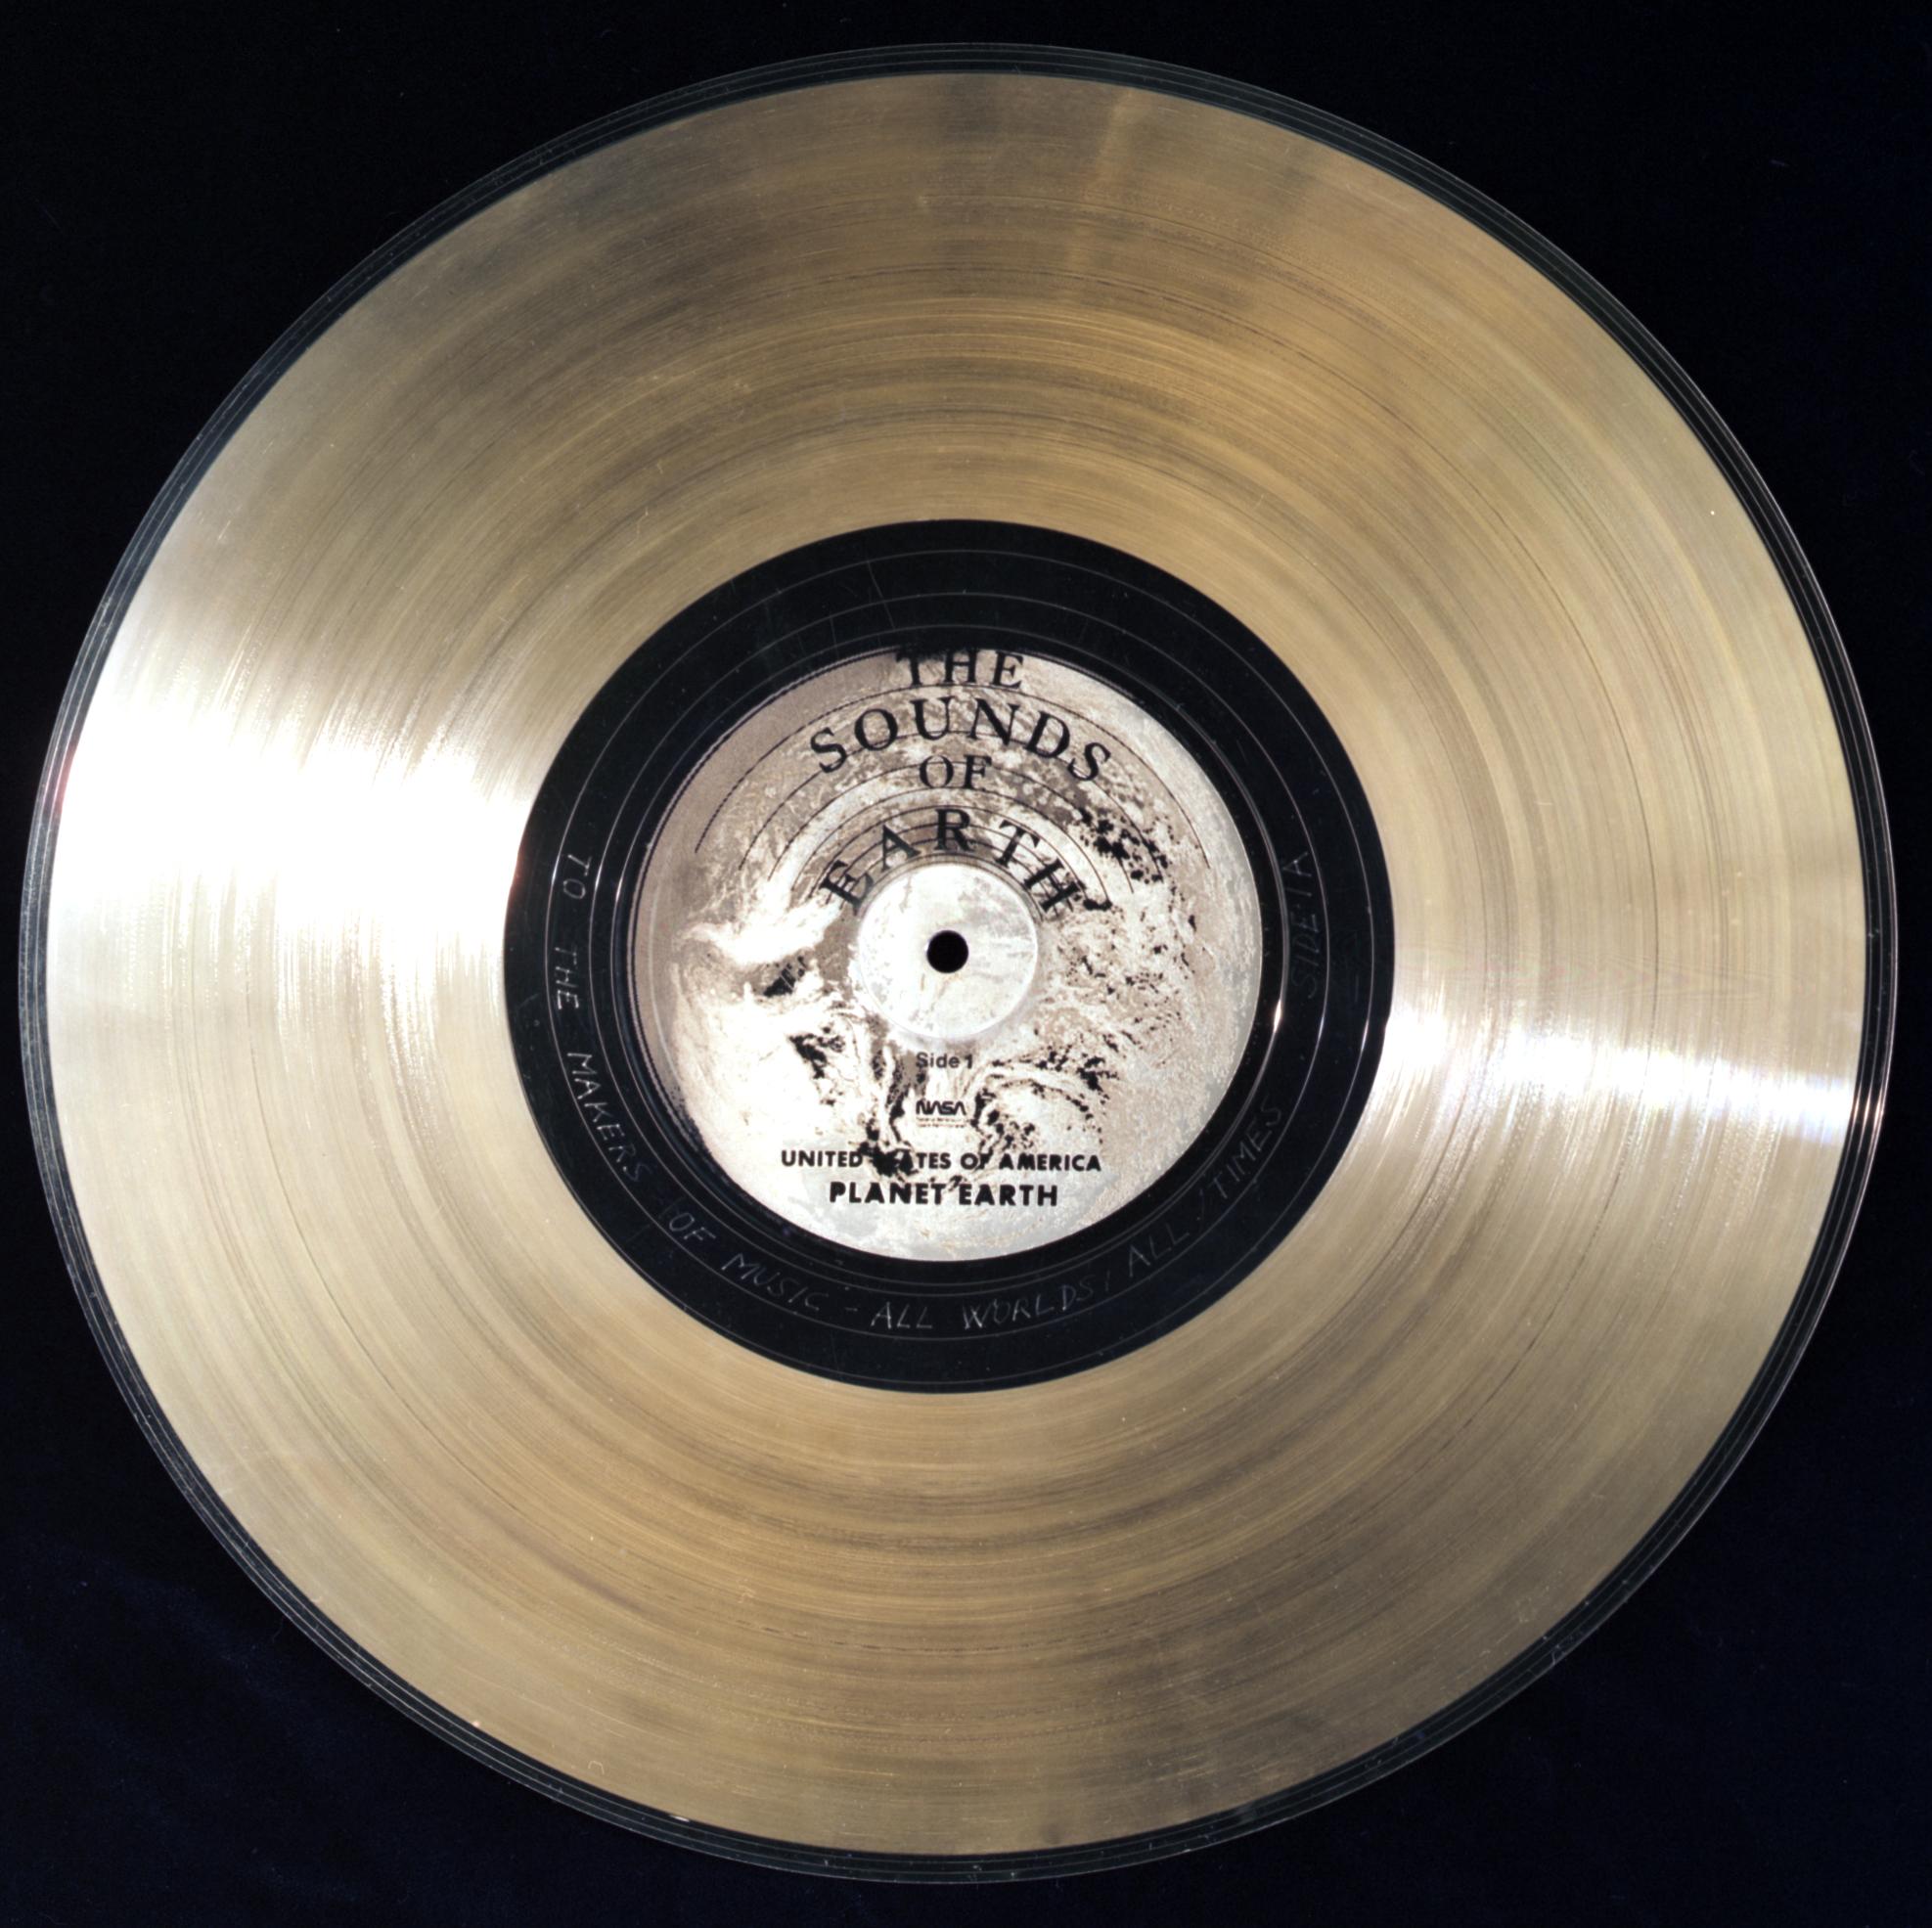 A golden record album with The Sounds of Earth United States of America, Planet Earth and etched with "To the makers of music, all worlds, all time."